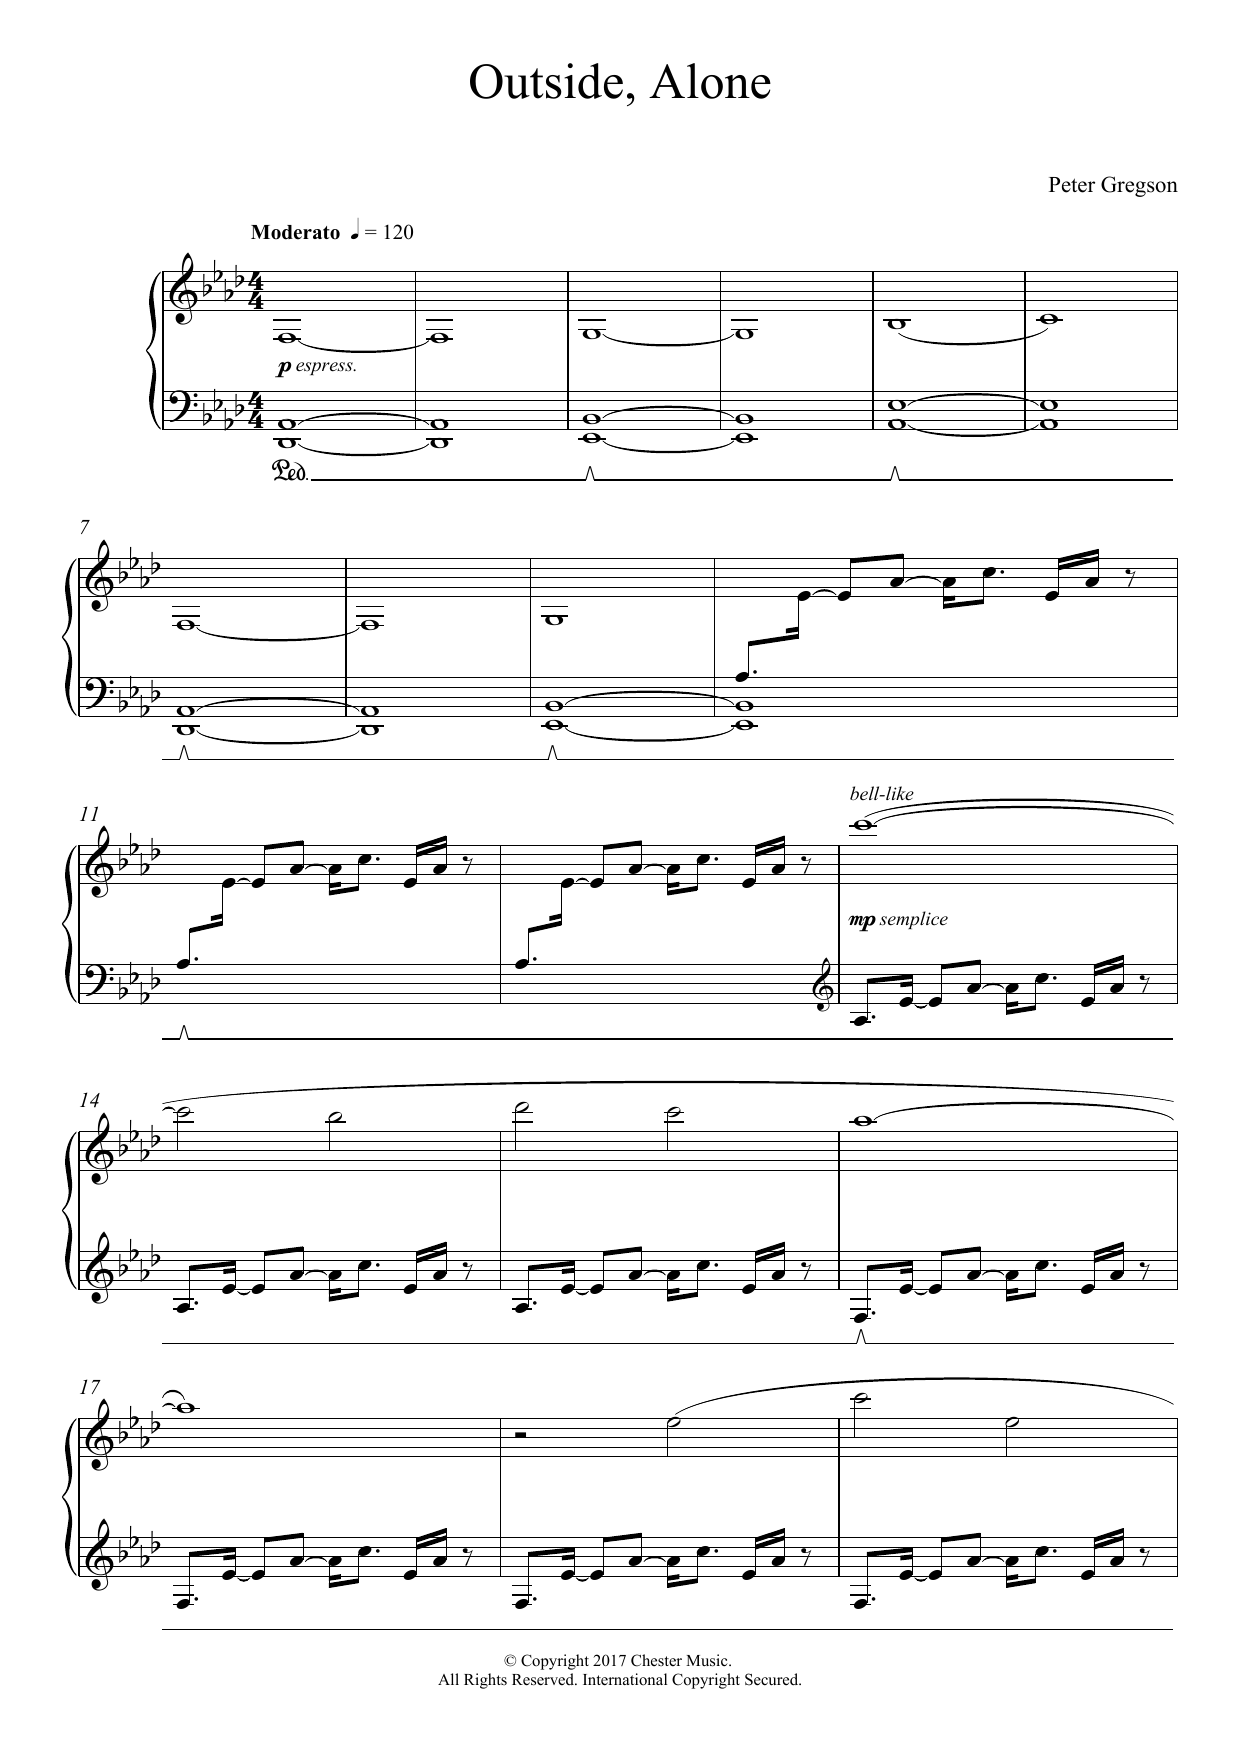 Download Peter Gregson Outside, Alone Sheet Music